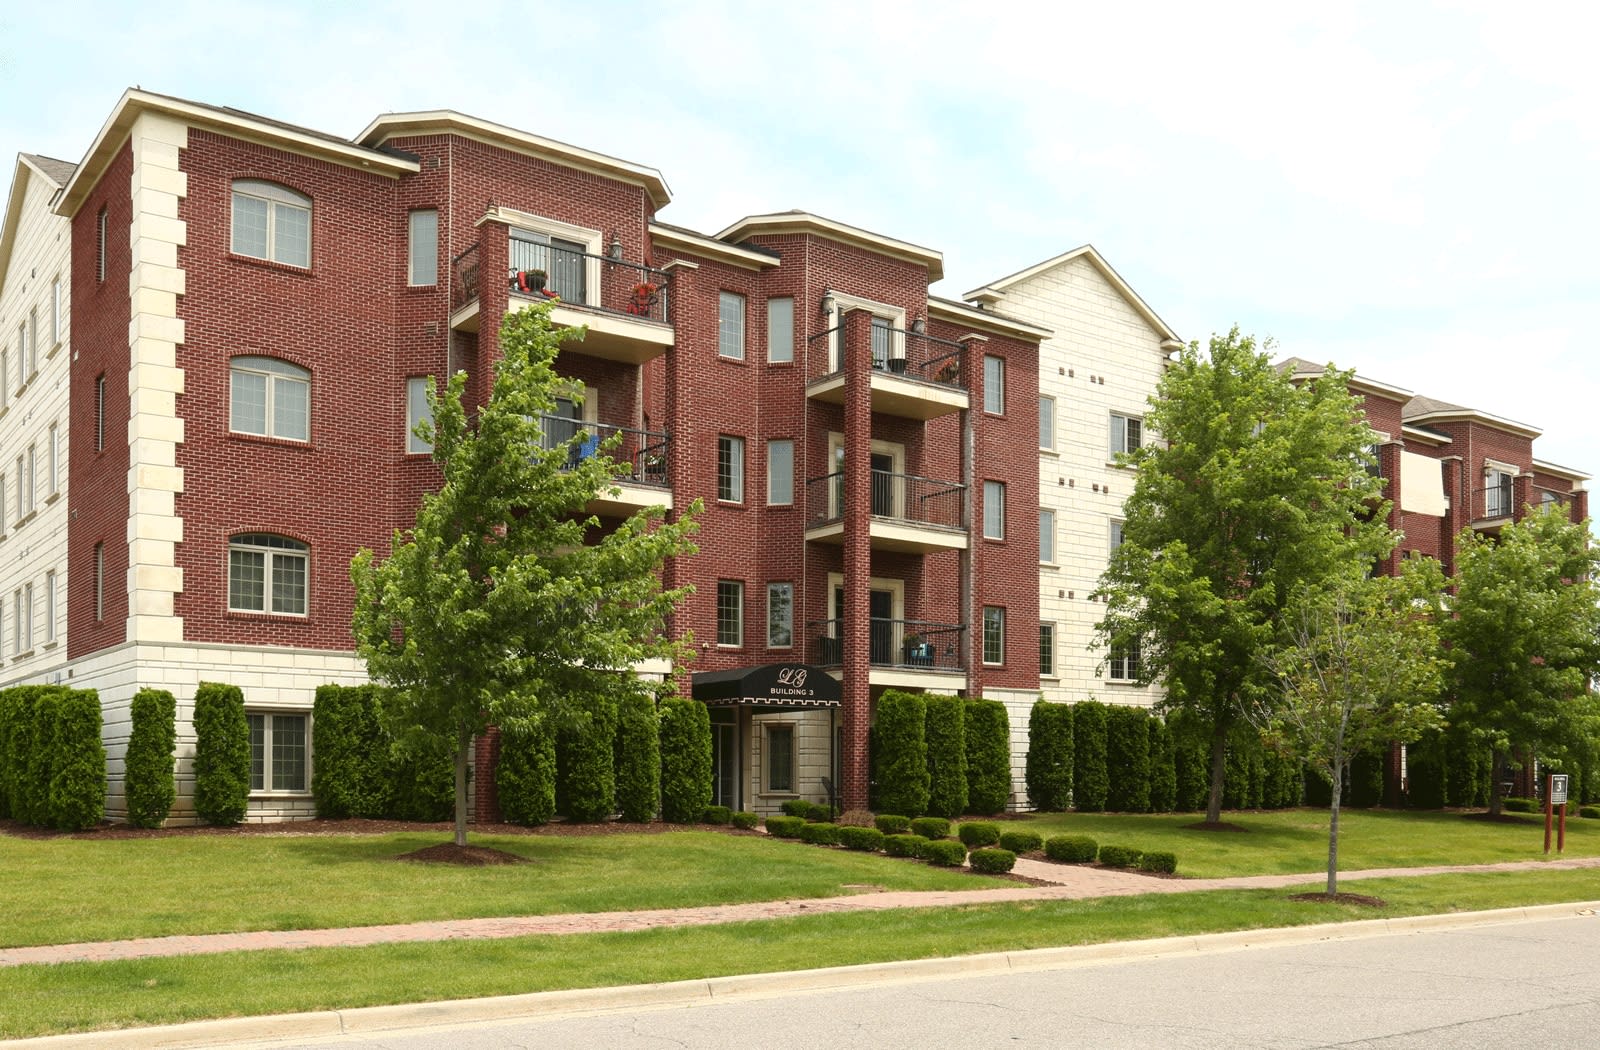 37  Apartments for rent in genesee mi for Small Space